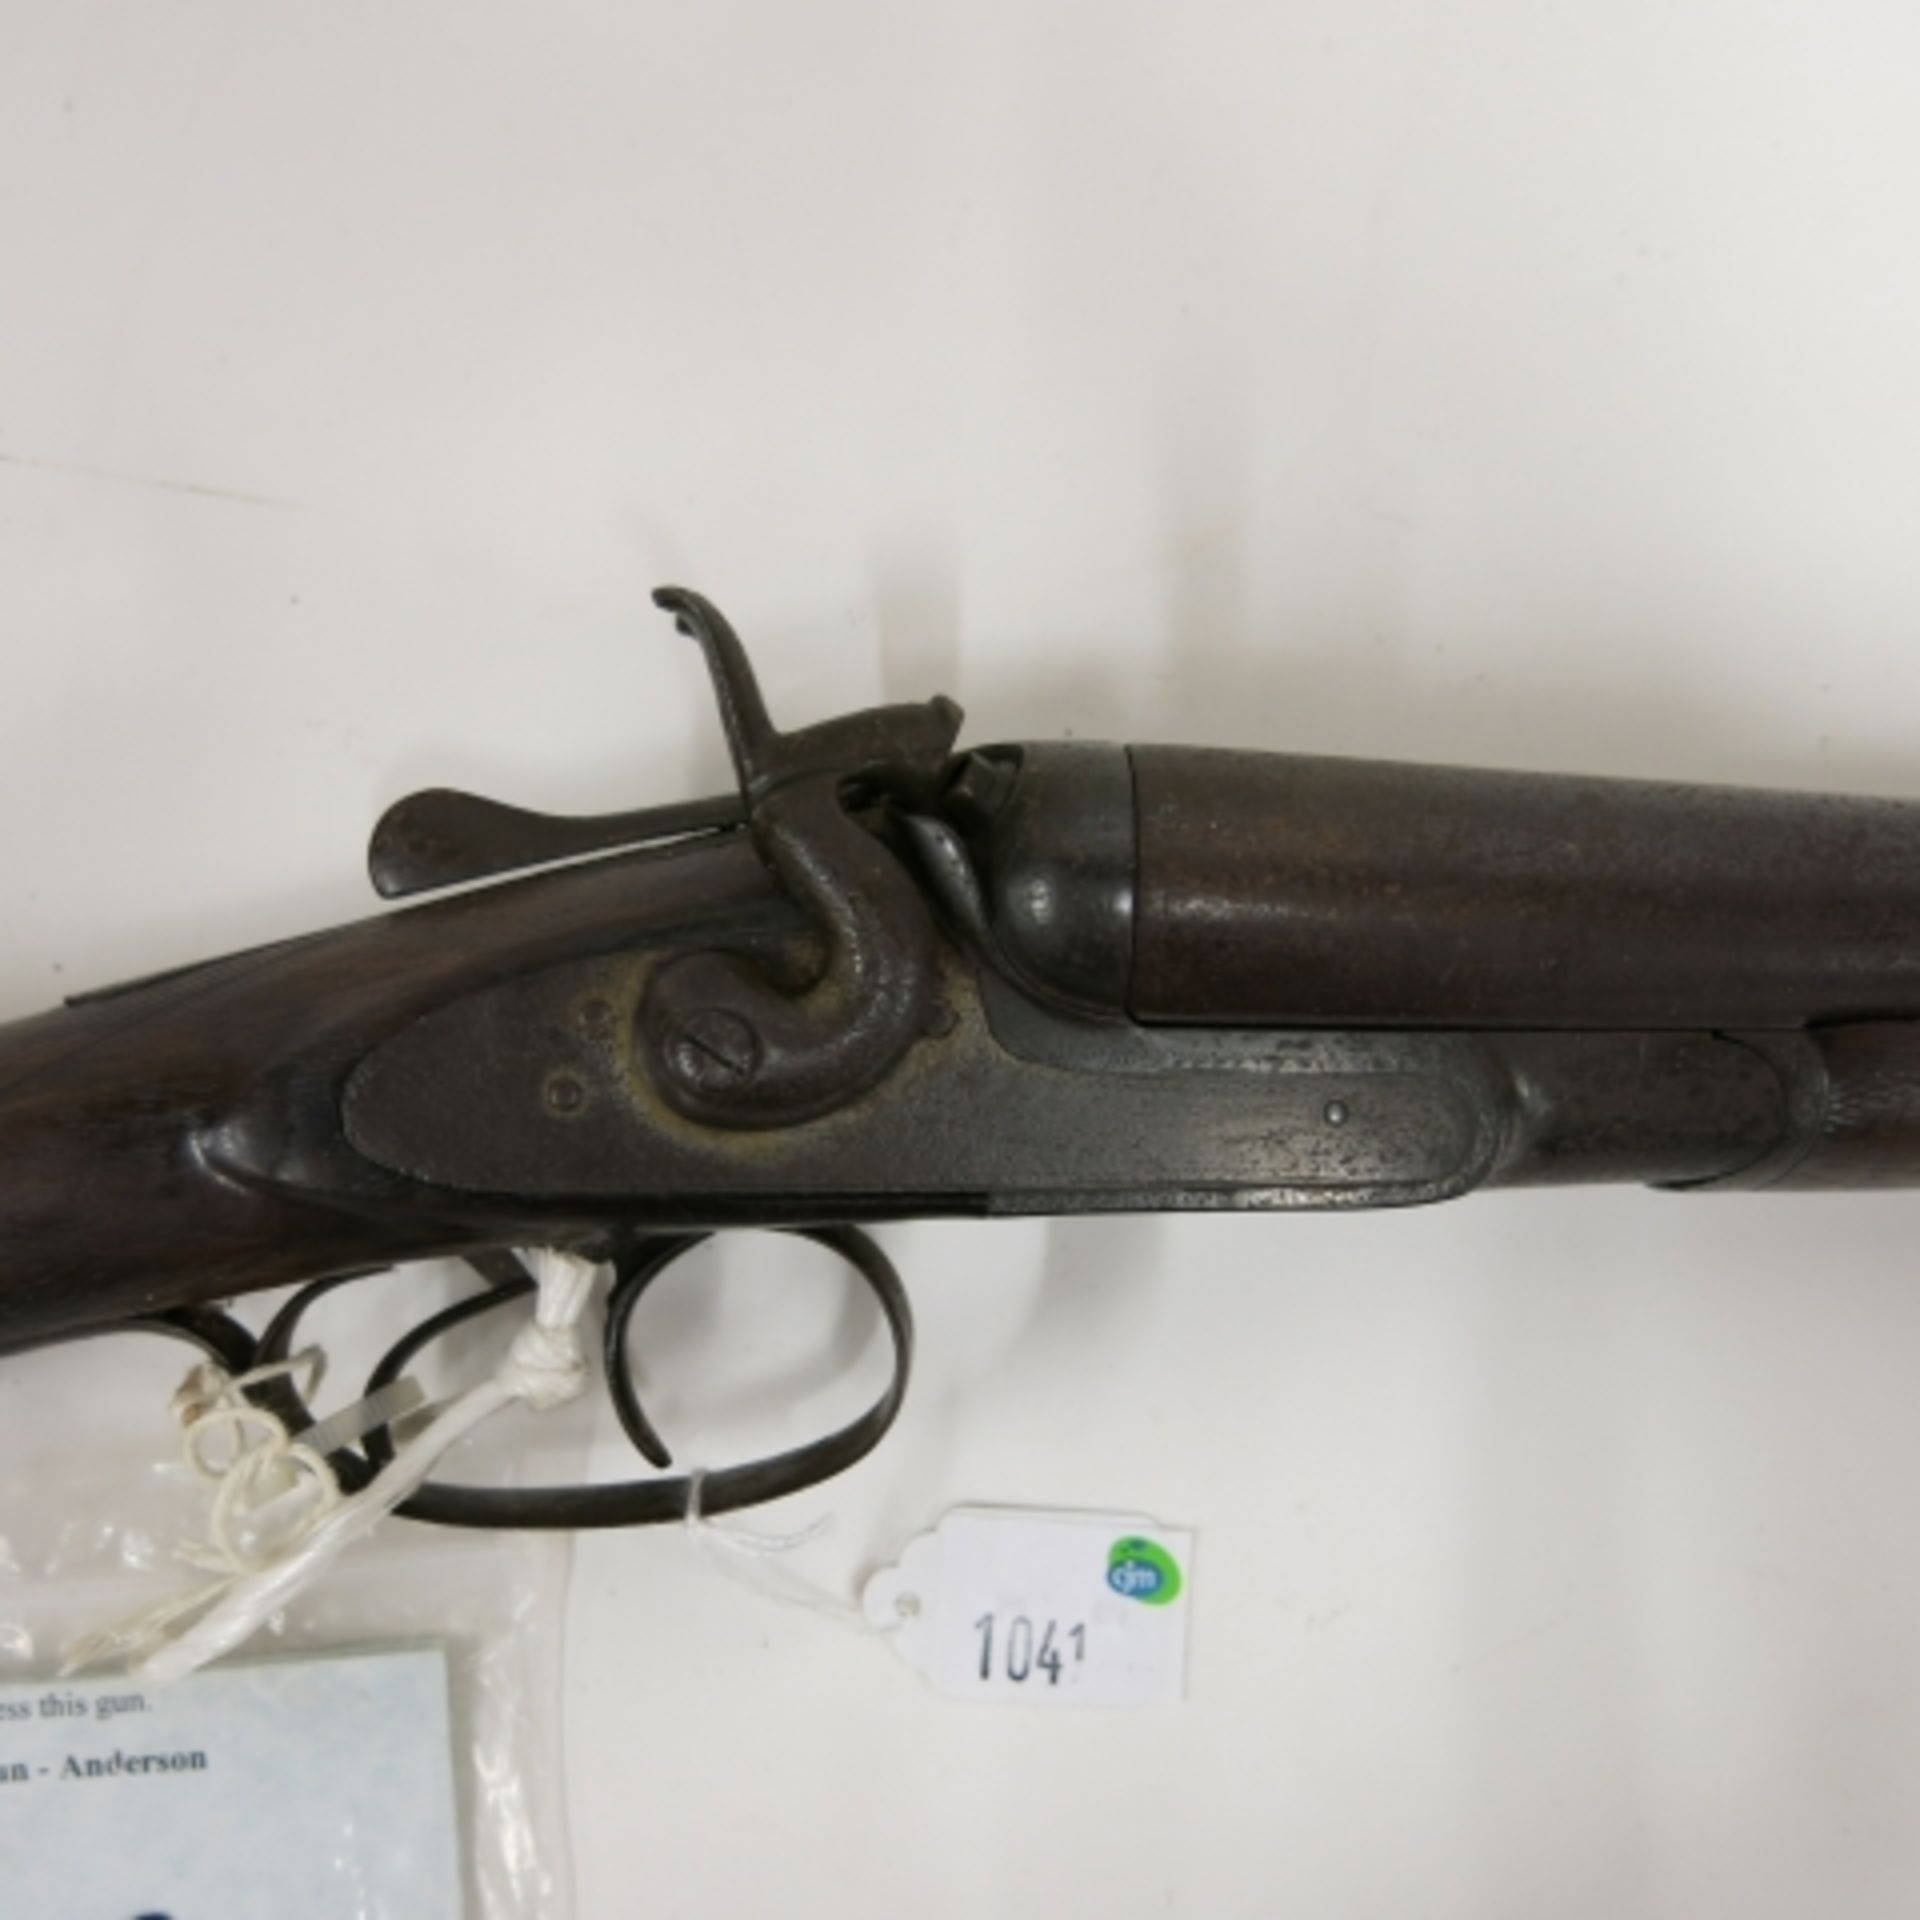 A 12 Bore Deactivated Side By Side Shotgun By Anderson, Hammer Action, Damascus Barrels, Working - Image 2 of 4